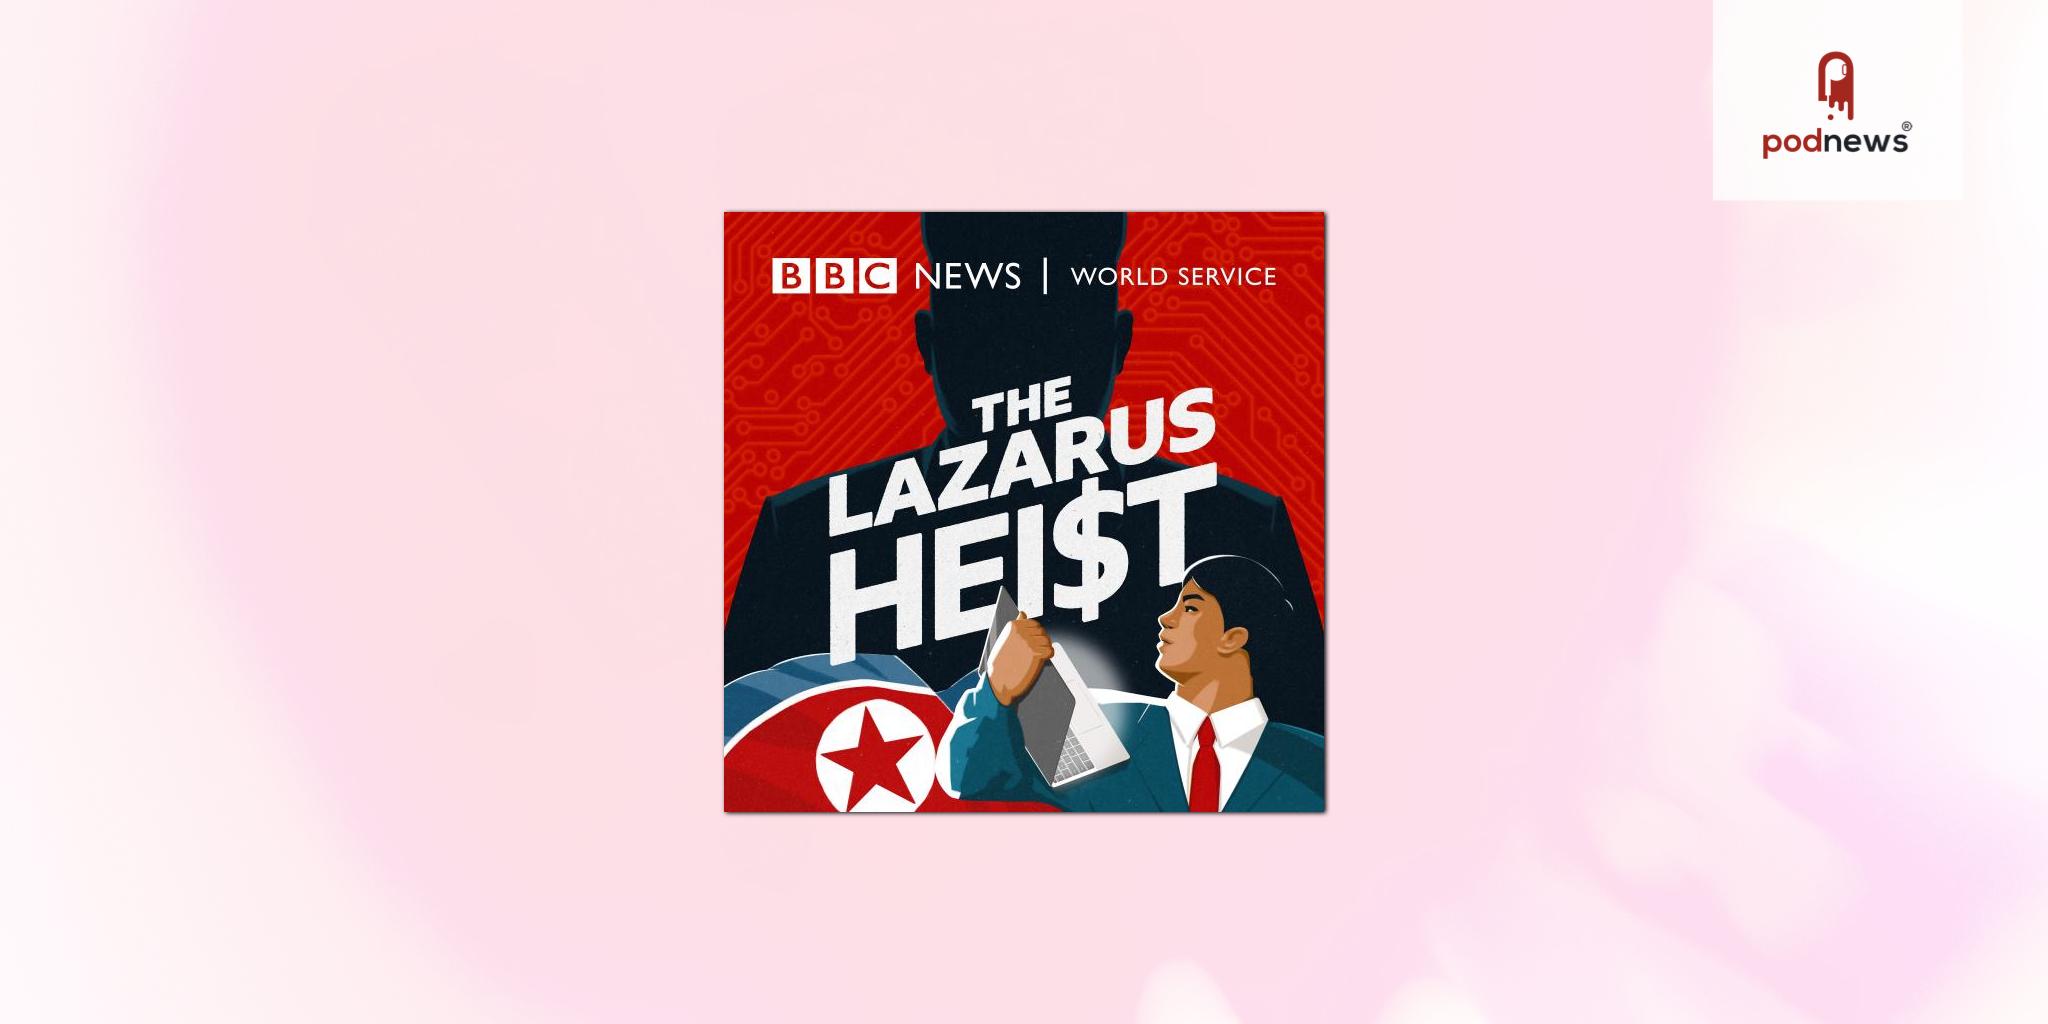 The Hackers Are Back: BBC’s The Lazarus Heist Returns For Season 2